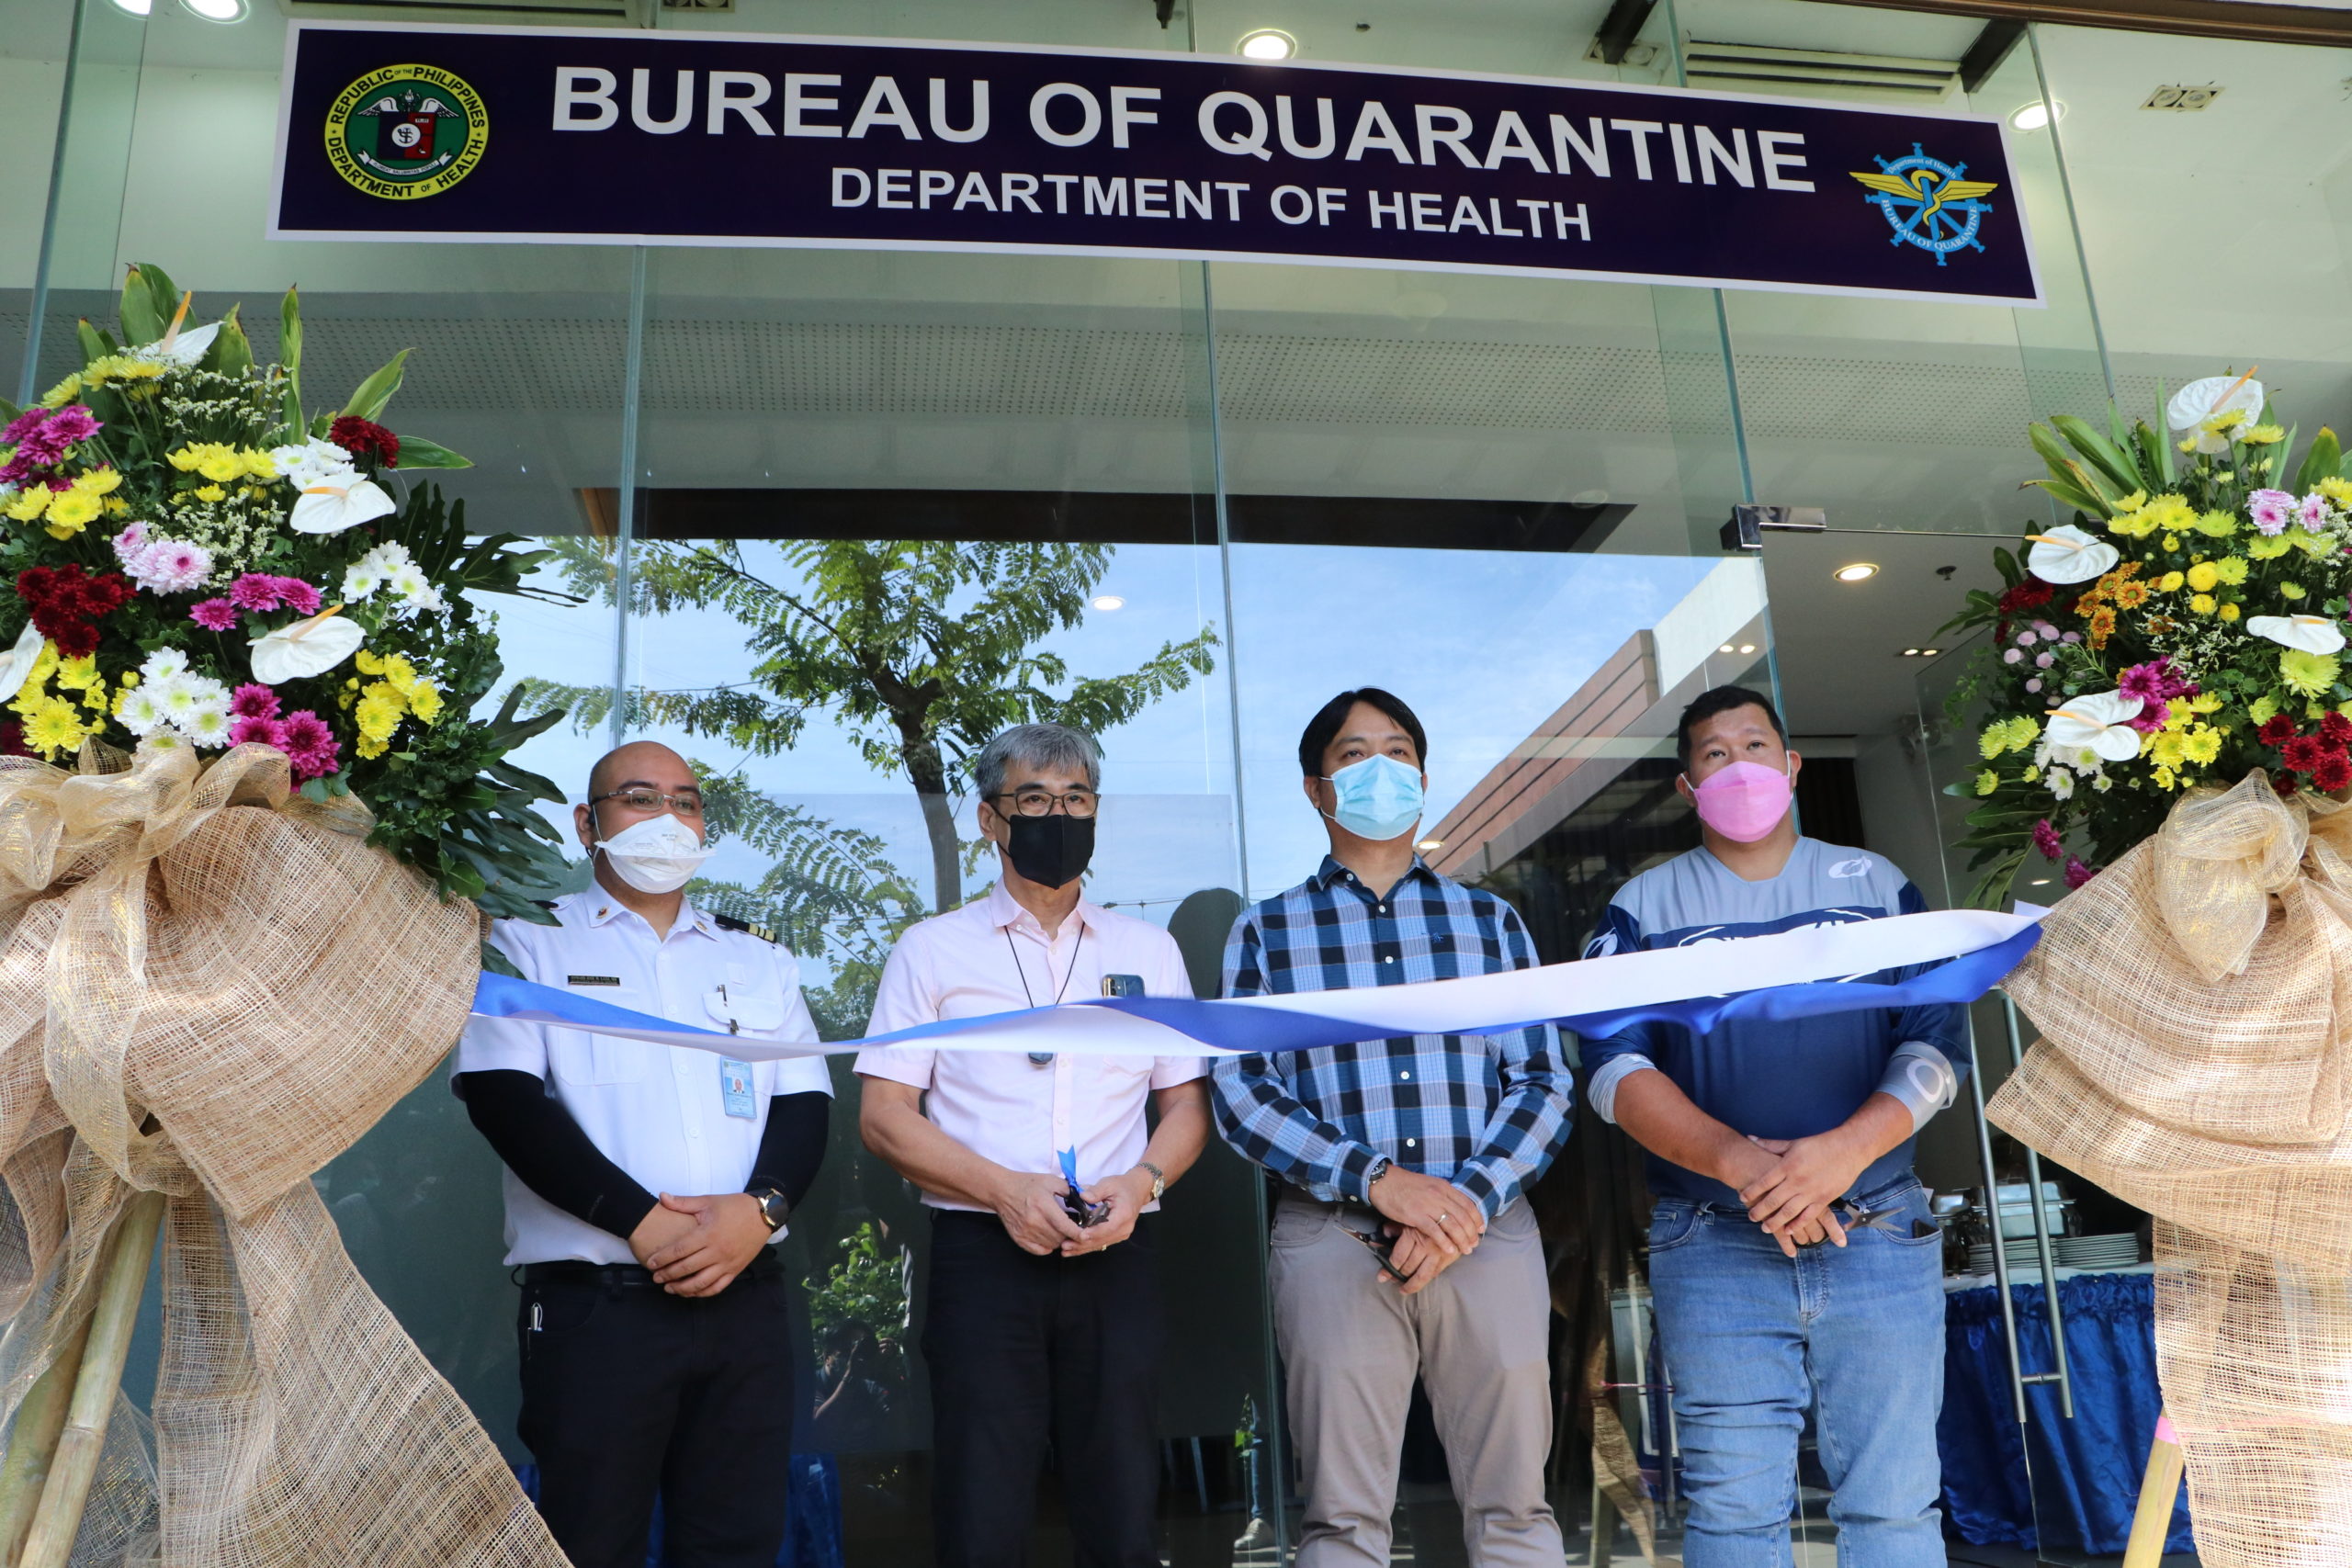 Bureau of Quarantine Subic chief Dr. Joseph Macaraeg (second from left) leads the inauguration of its satellite office inside the Subic Bay Freeport. He is joined by (left-right) Dr. Howard Lazo, Harbor Point general manager Engr. Lesly Manalo, and BOQ Subic deputy director Dr. Roberto Salvador Jr. (Photo courtesy of SBMA)